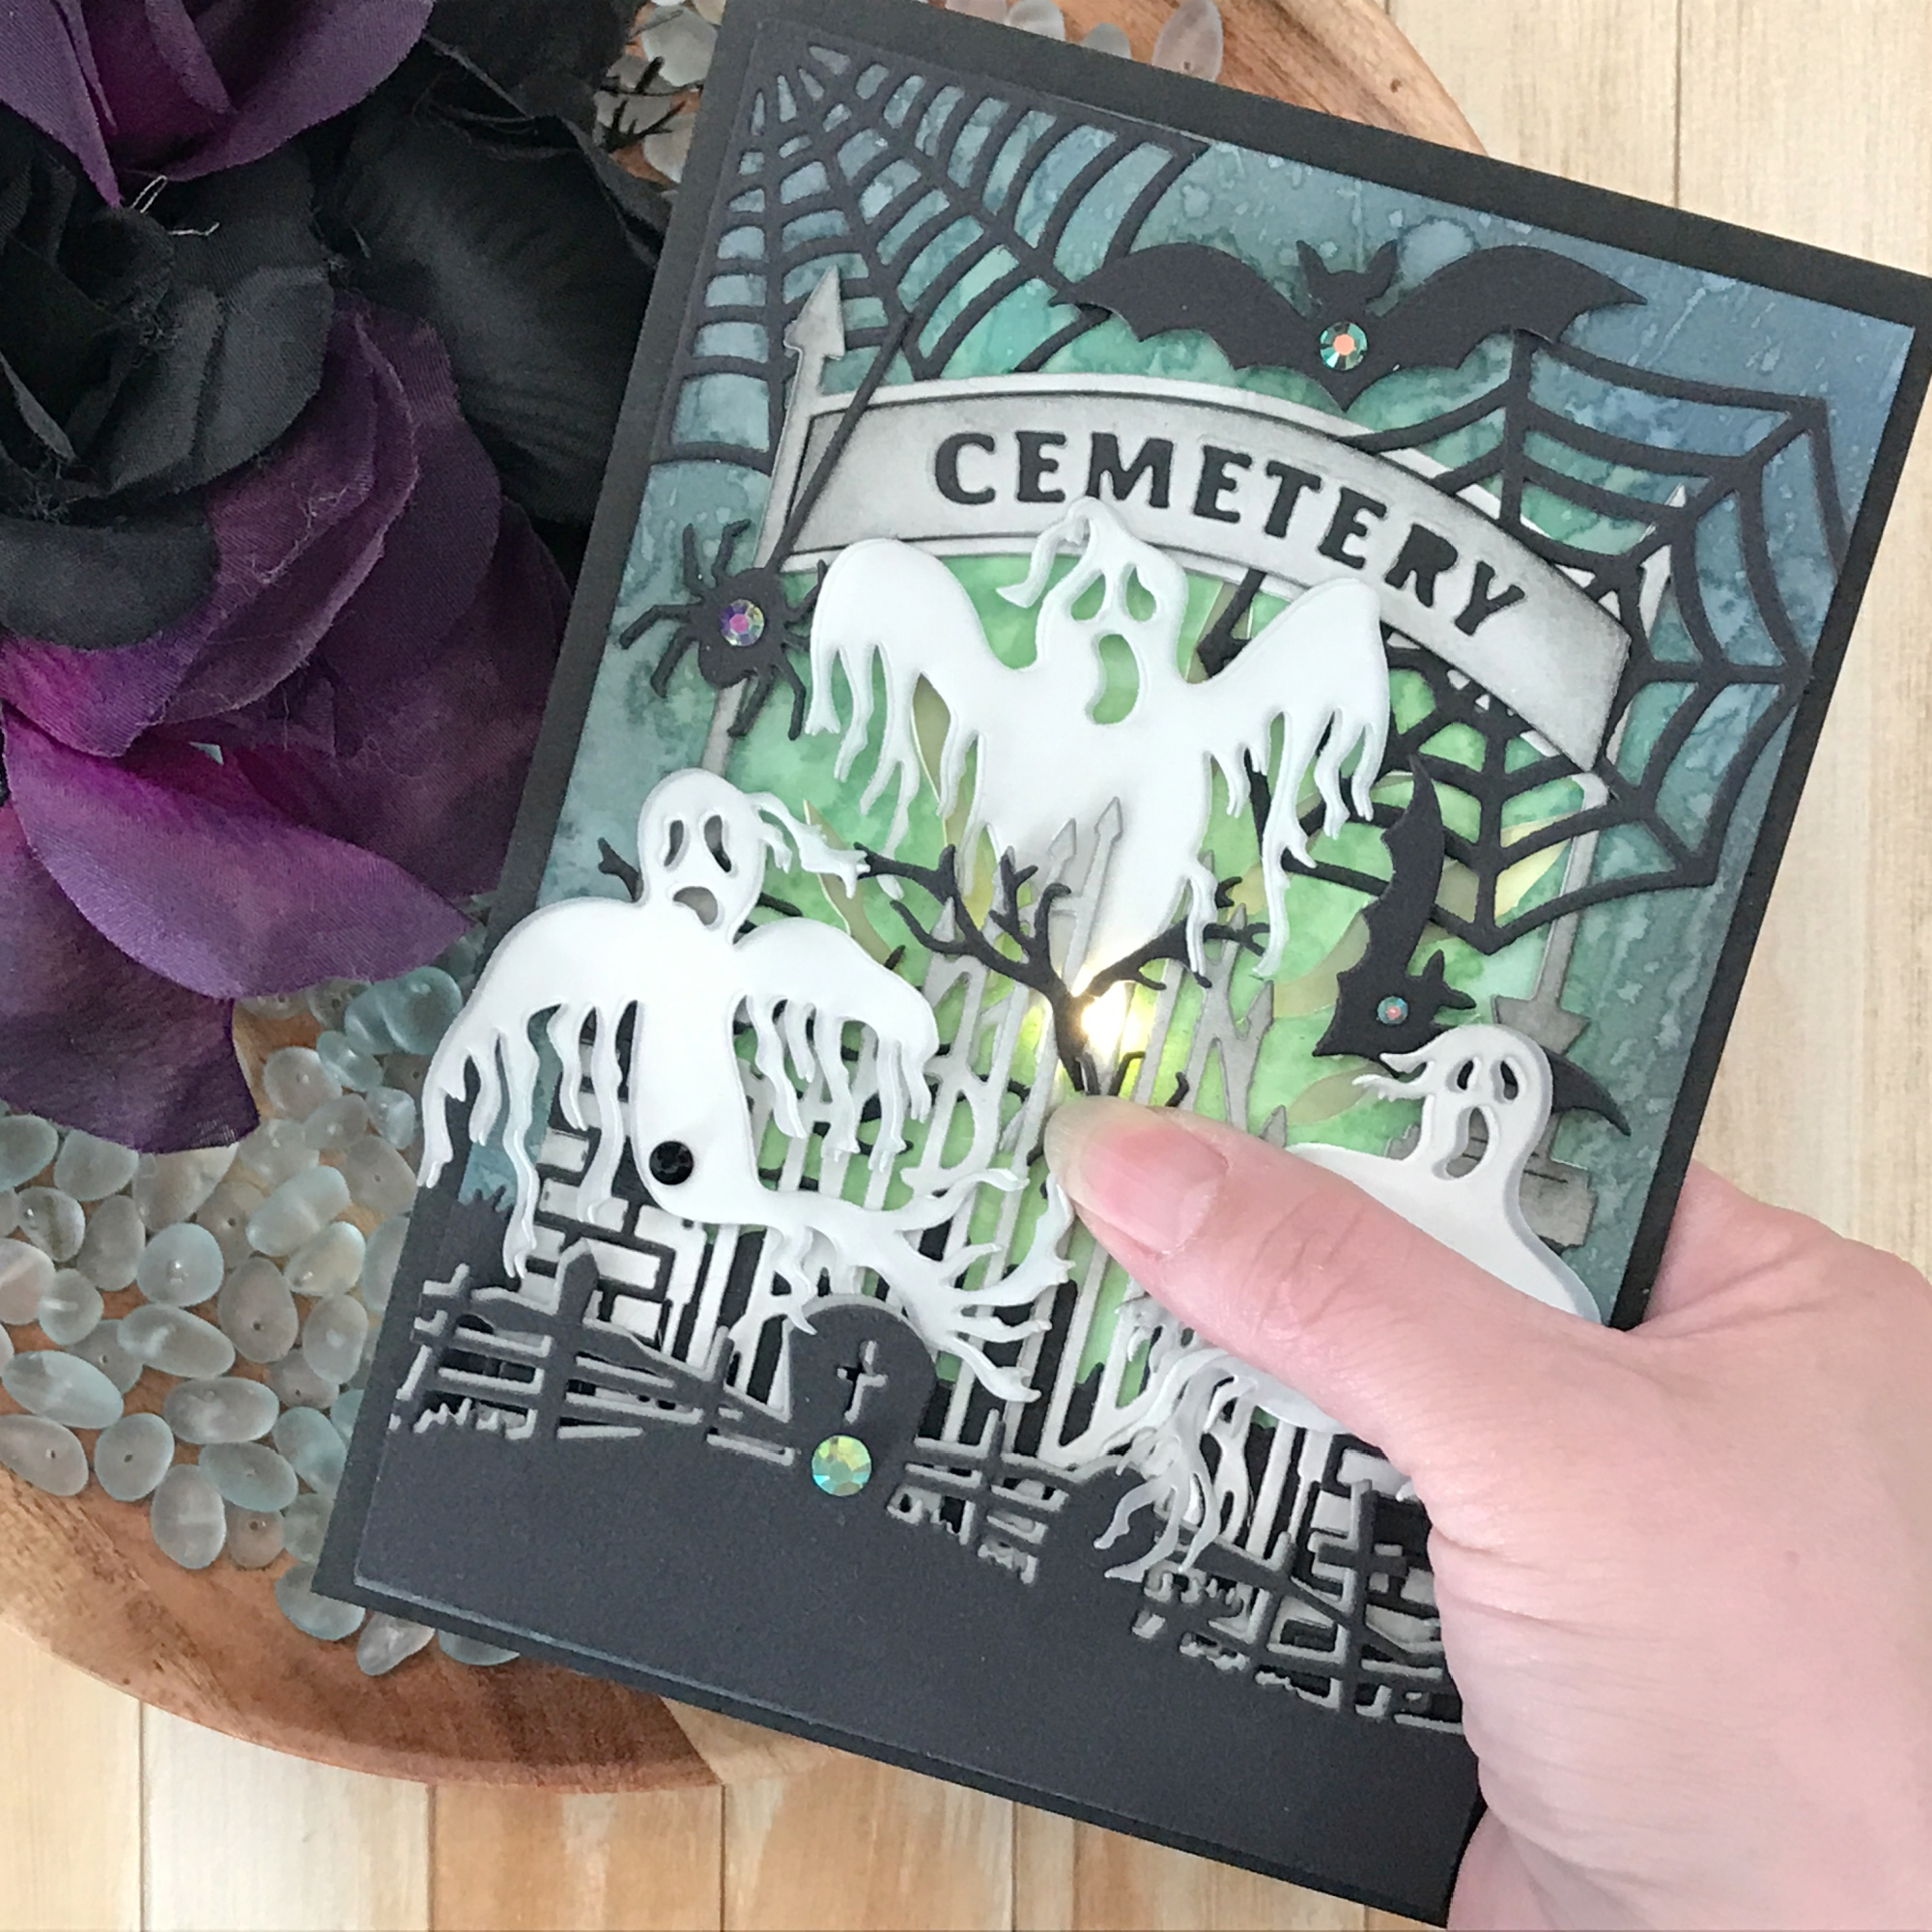 Glowing Cemetery with Desiree Kuemmerle